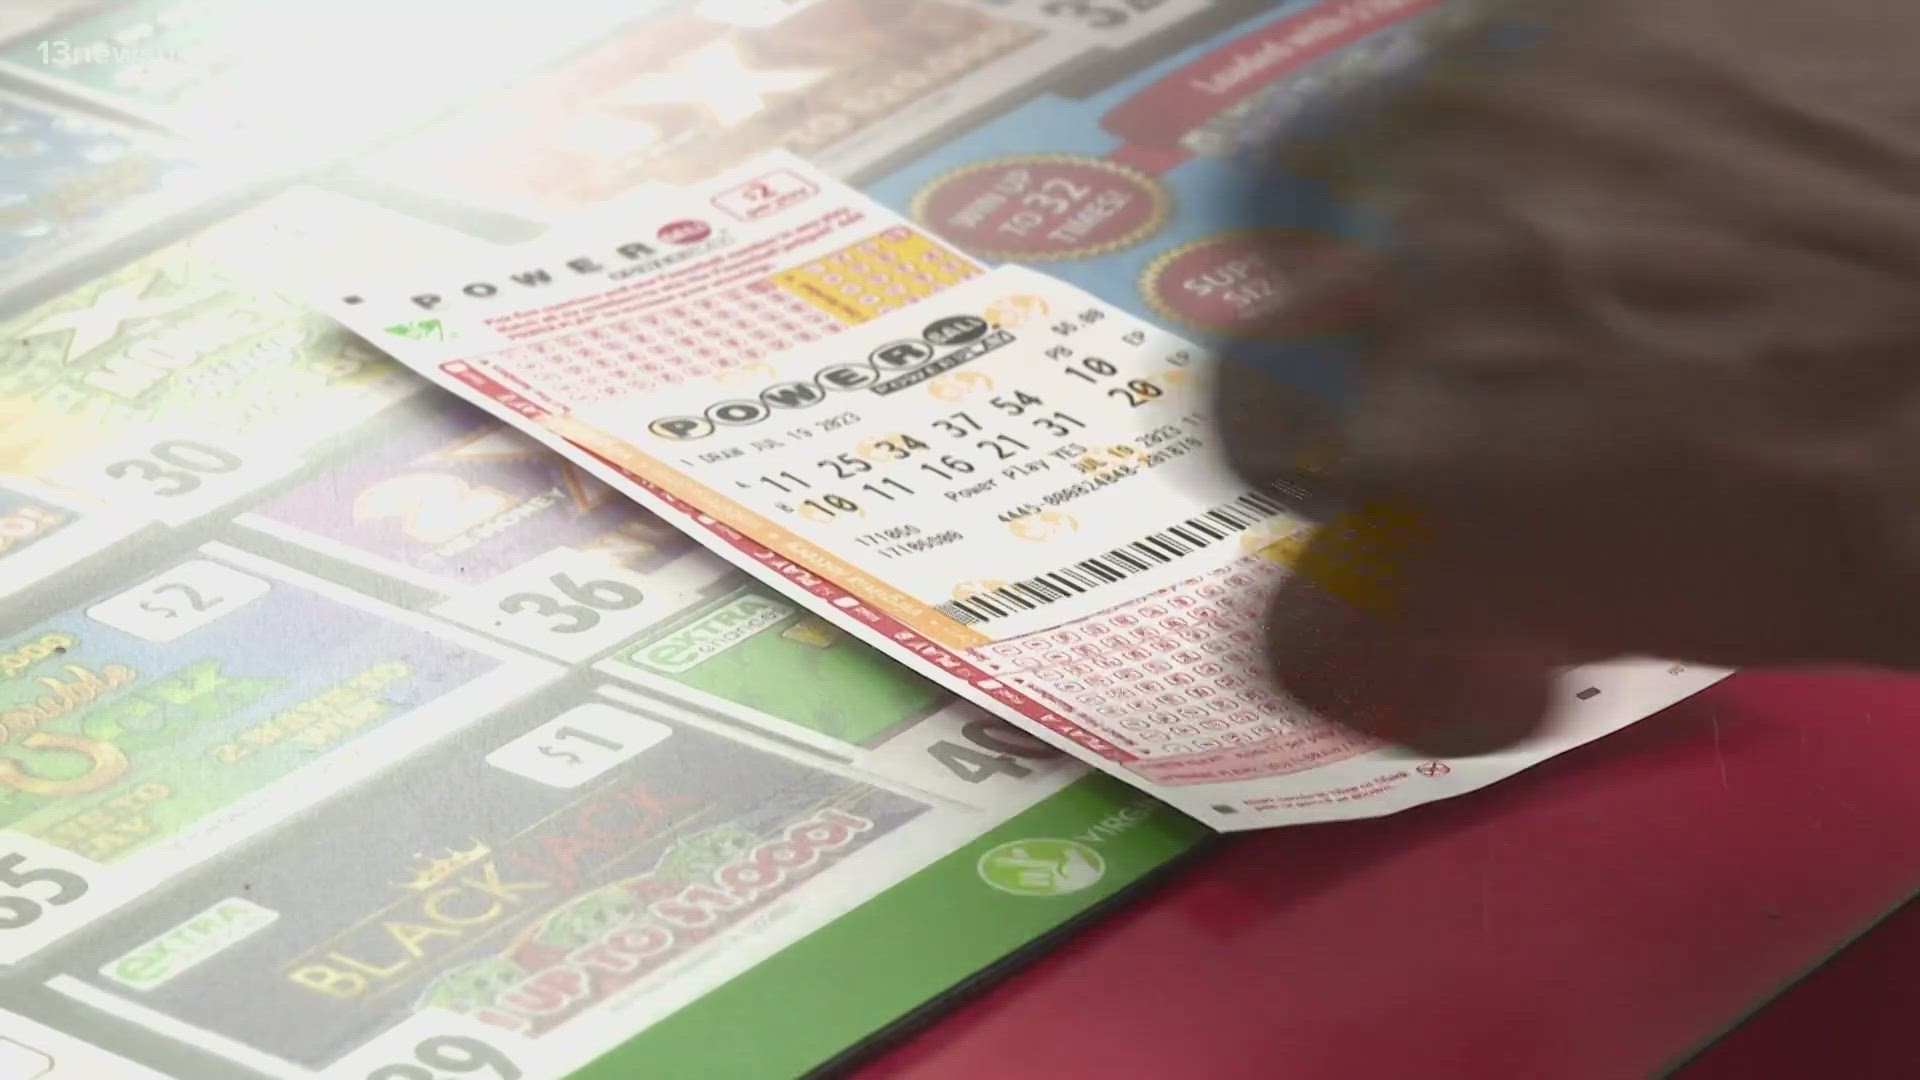 Officials announce where $2-million Powerball ticket was sold in Maine